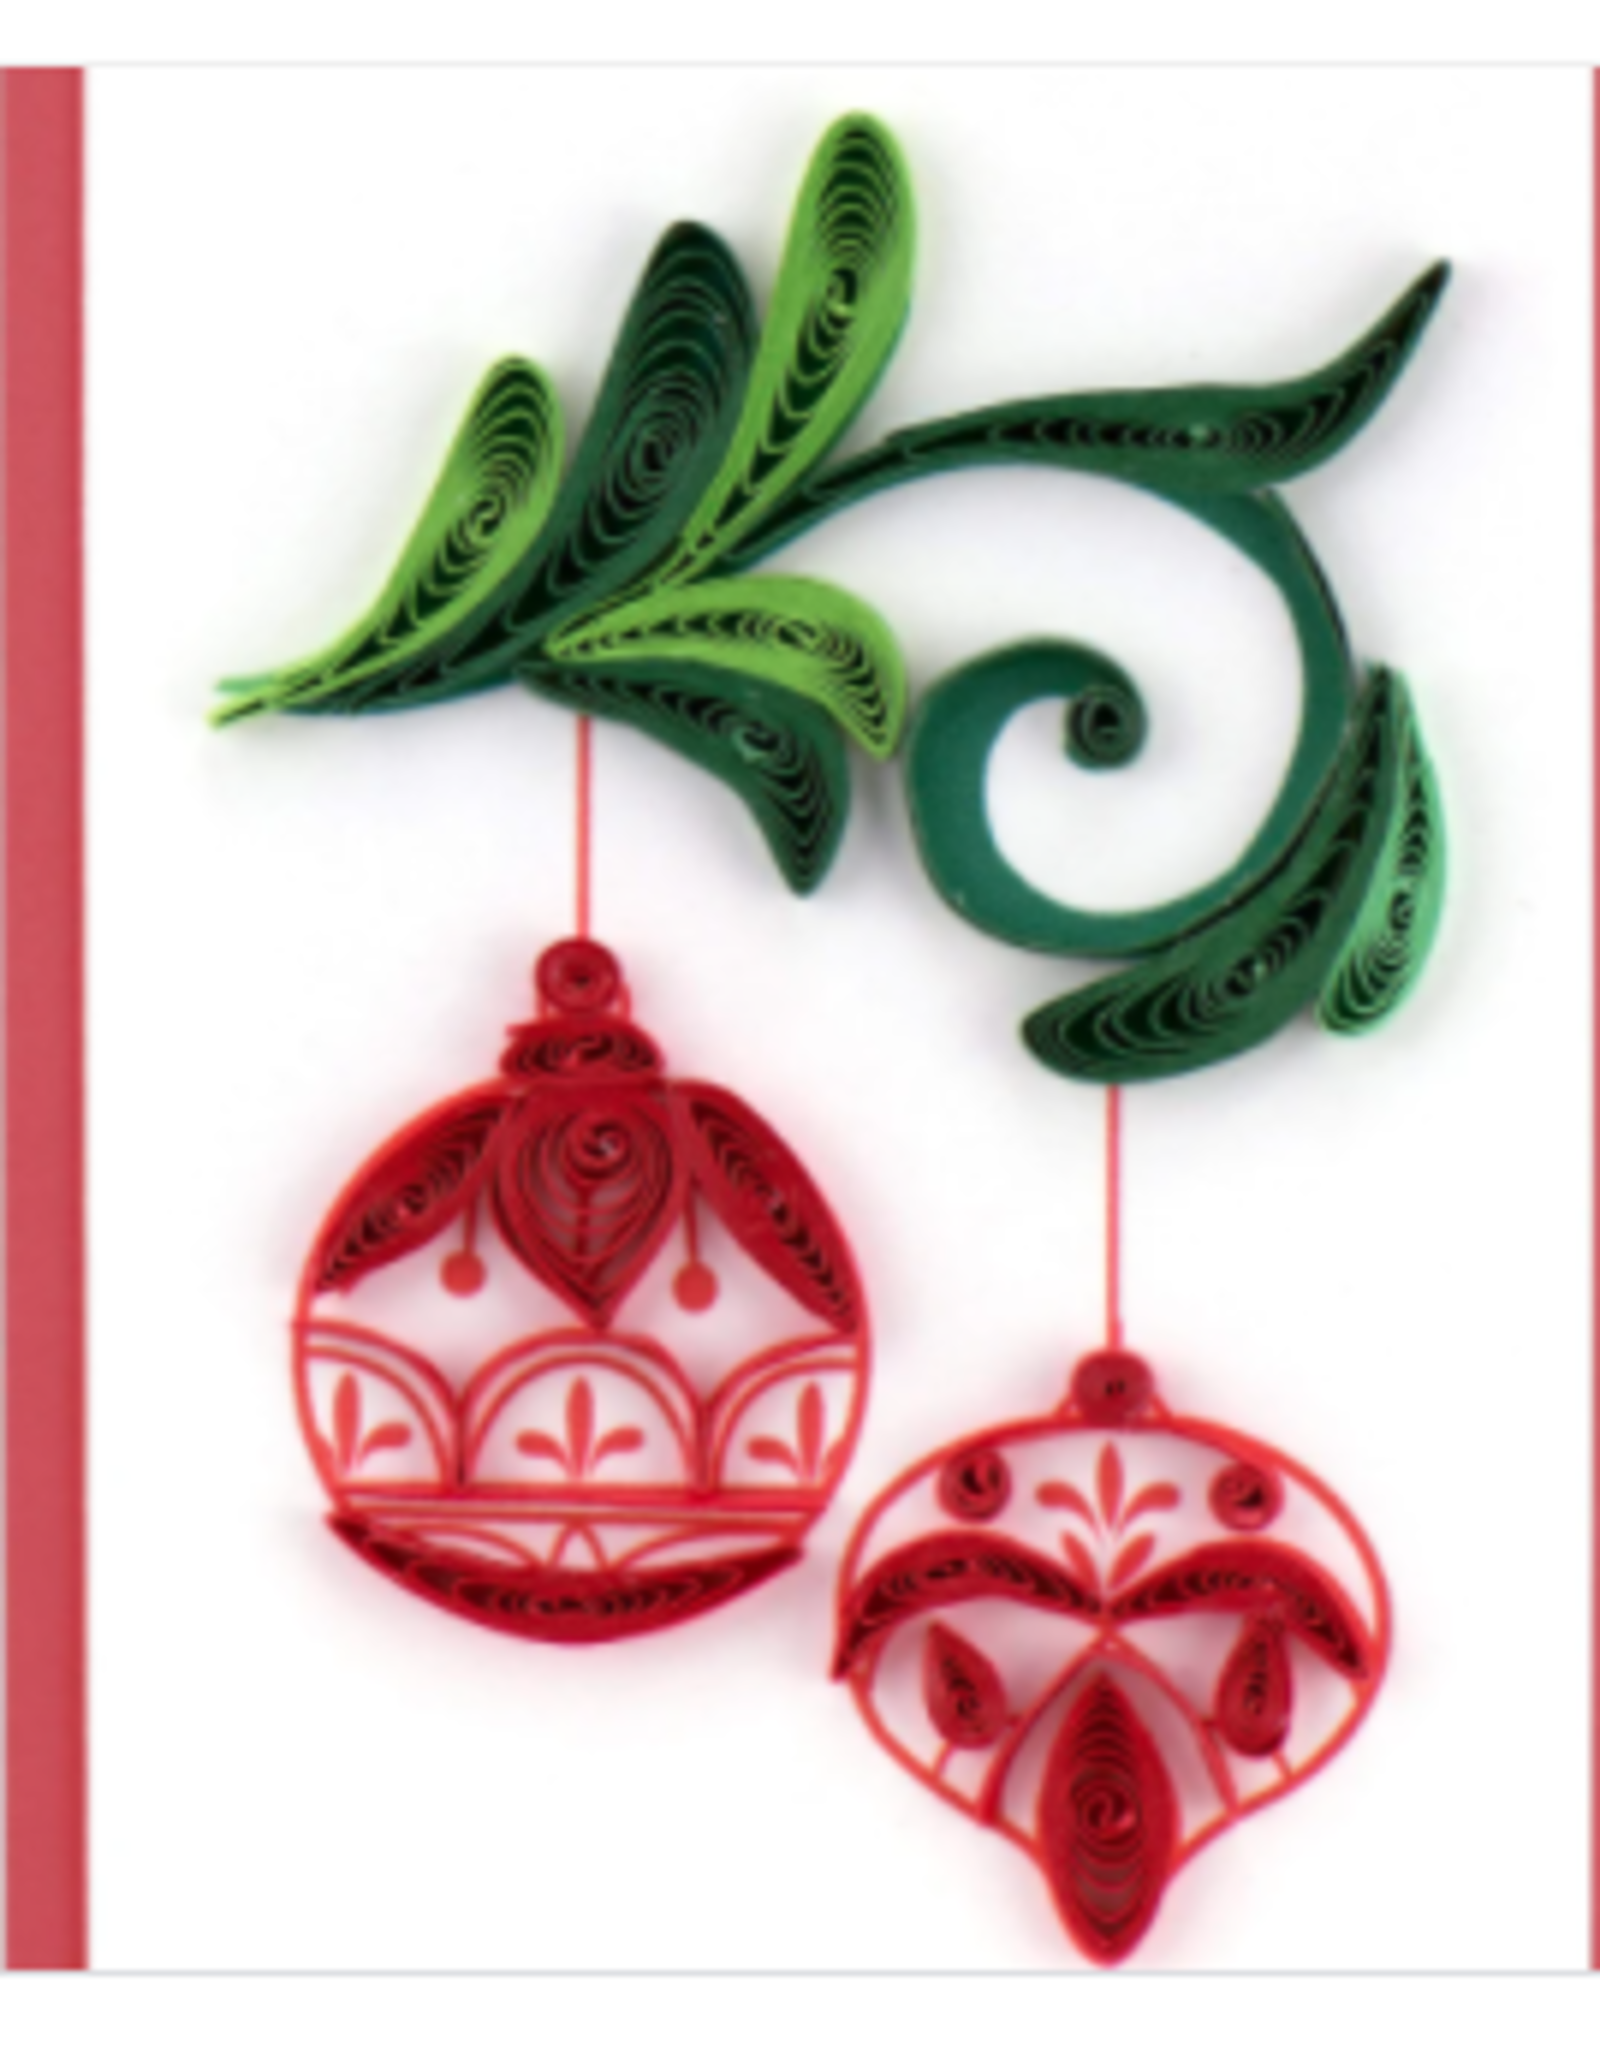 Trade roots Red Ornament, Quill Gift Enclosure Card, Vietnam